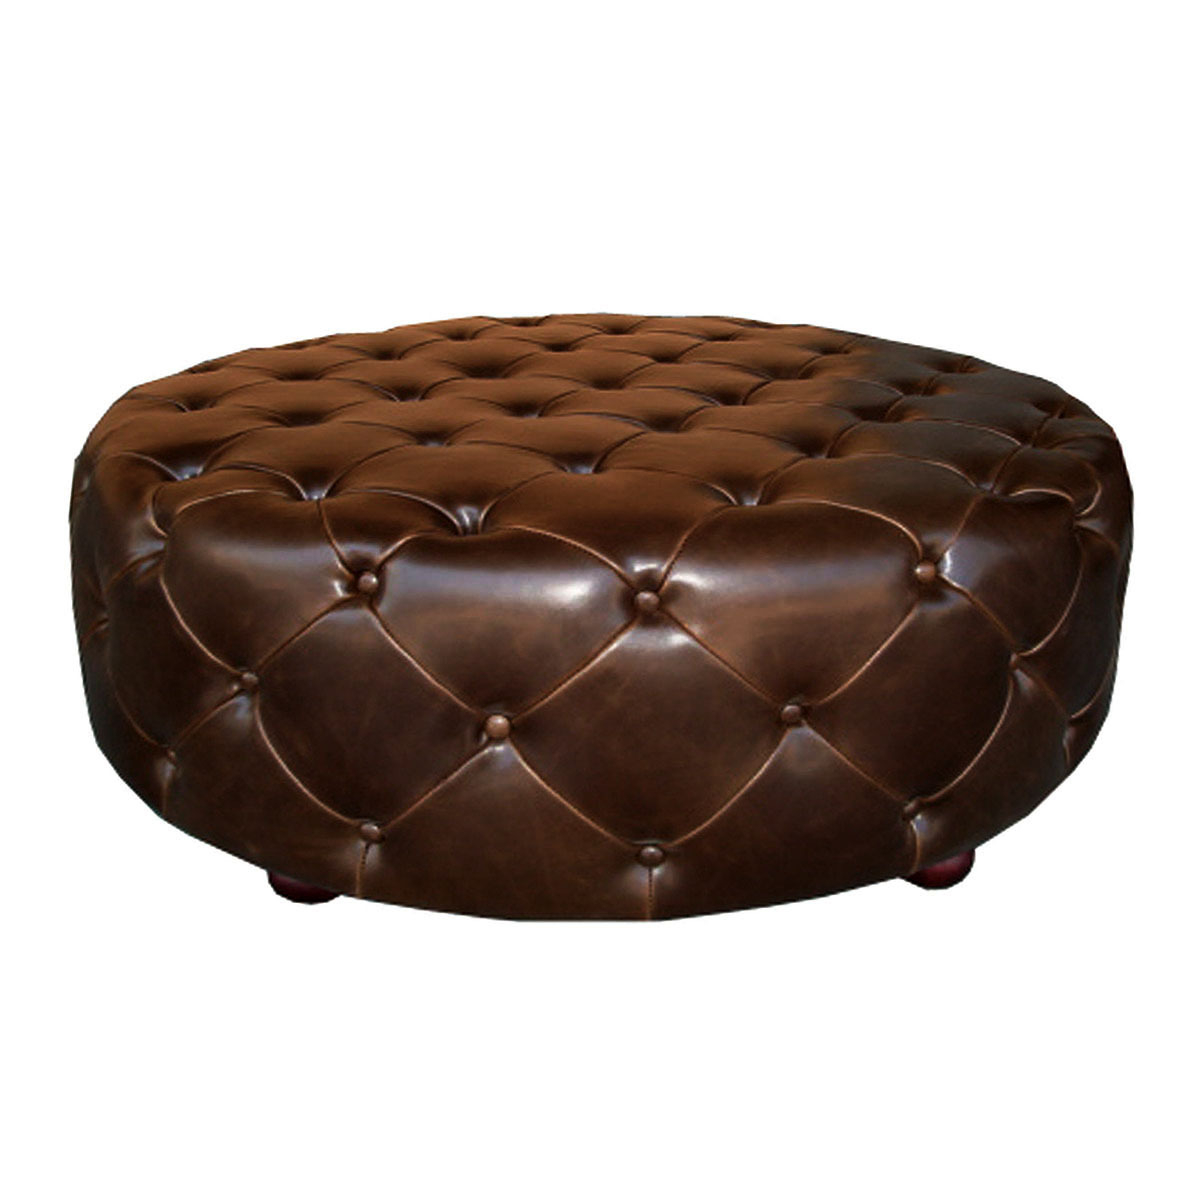 Home furniture living room soho tufted round ottoman